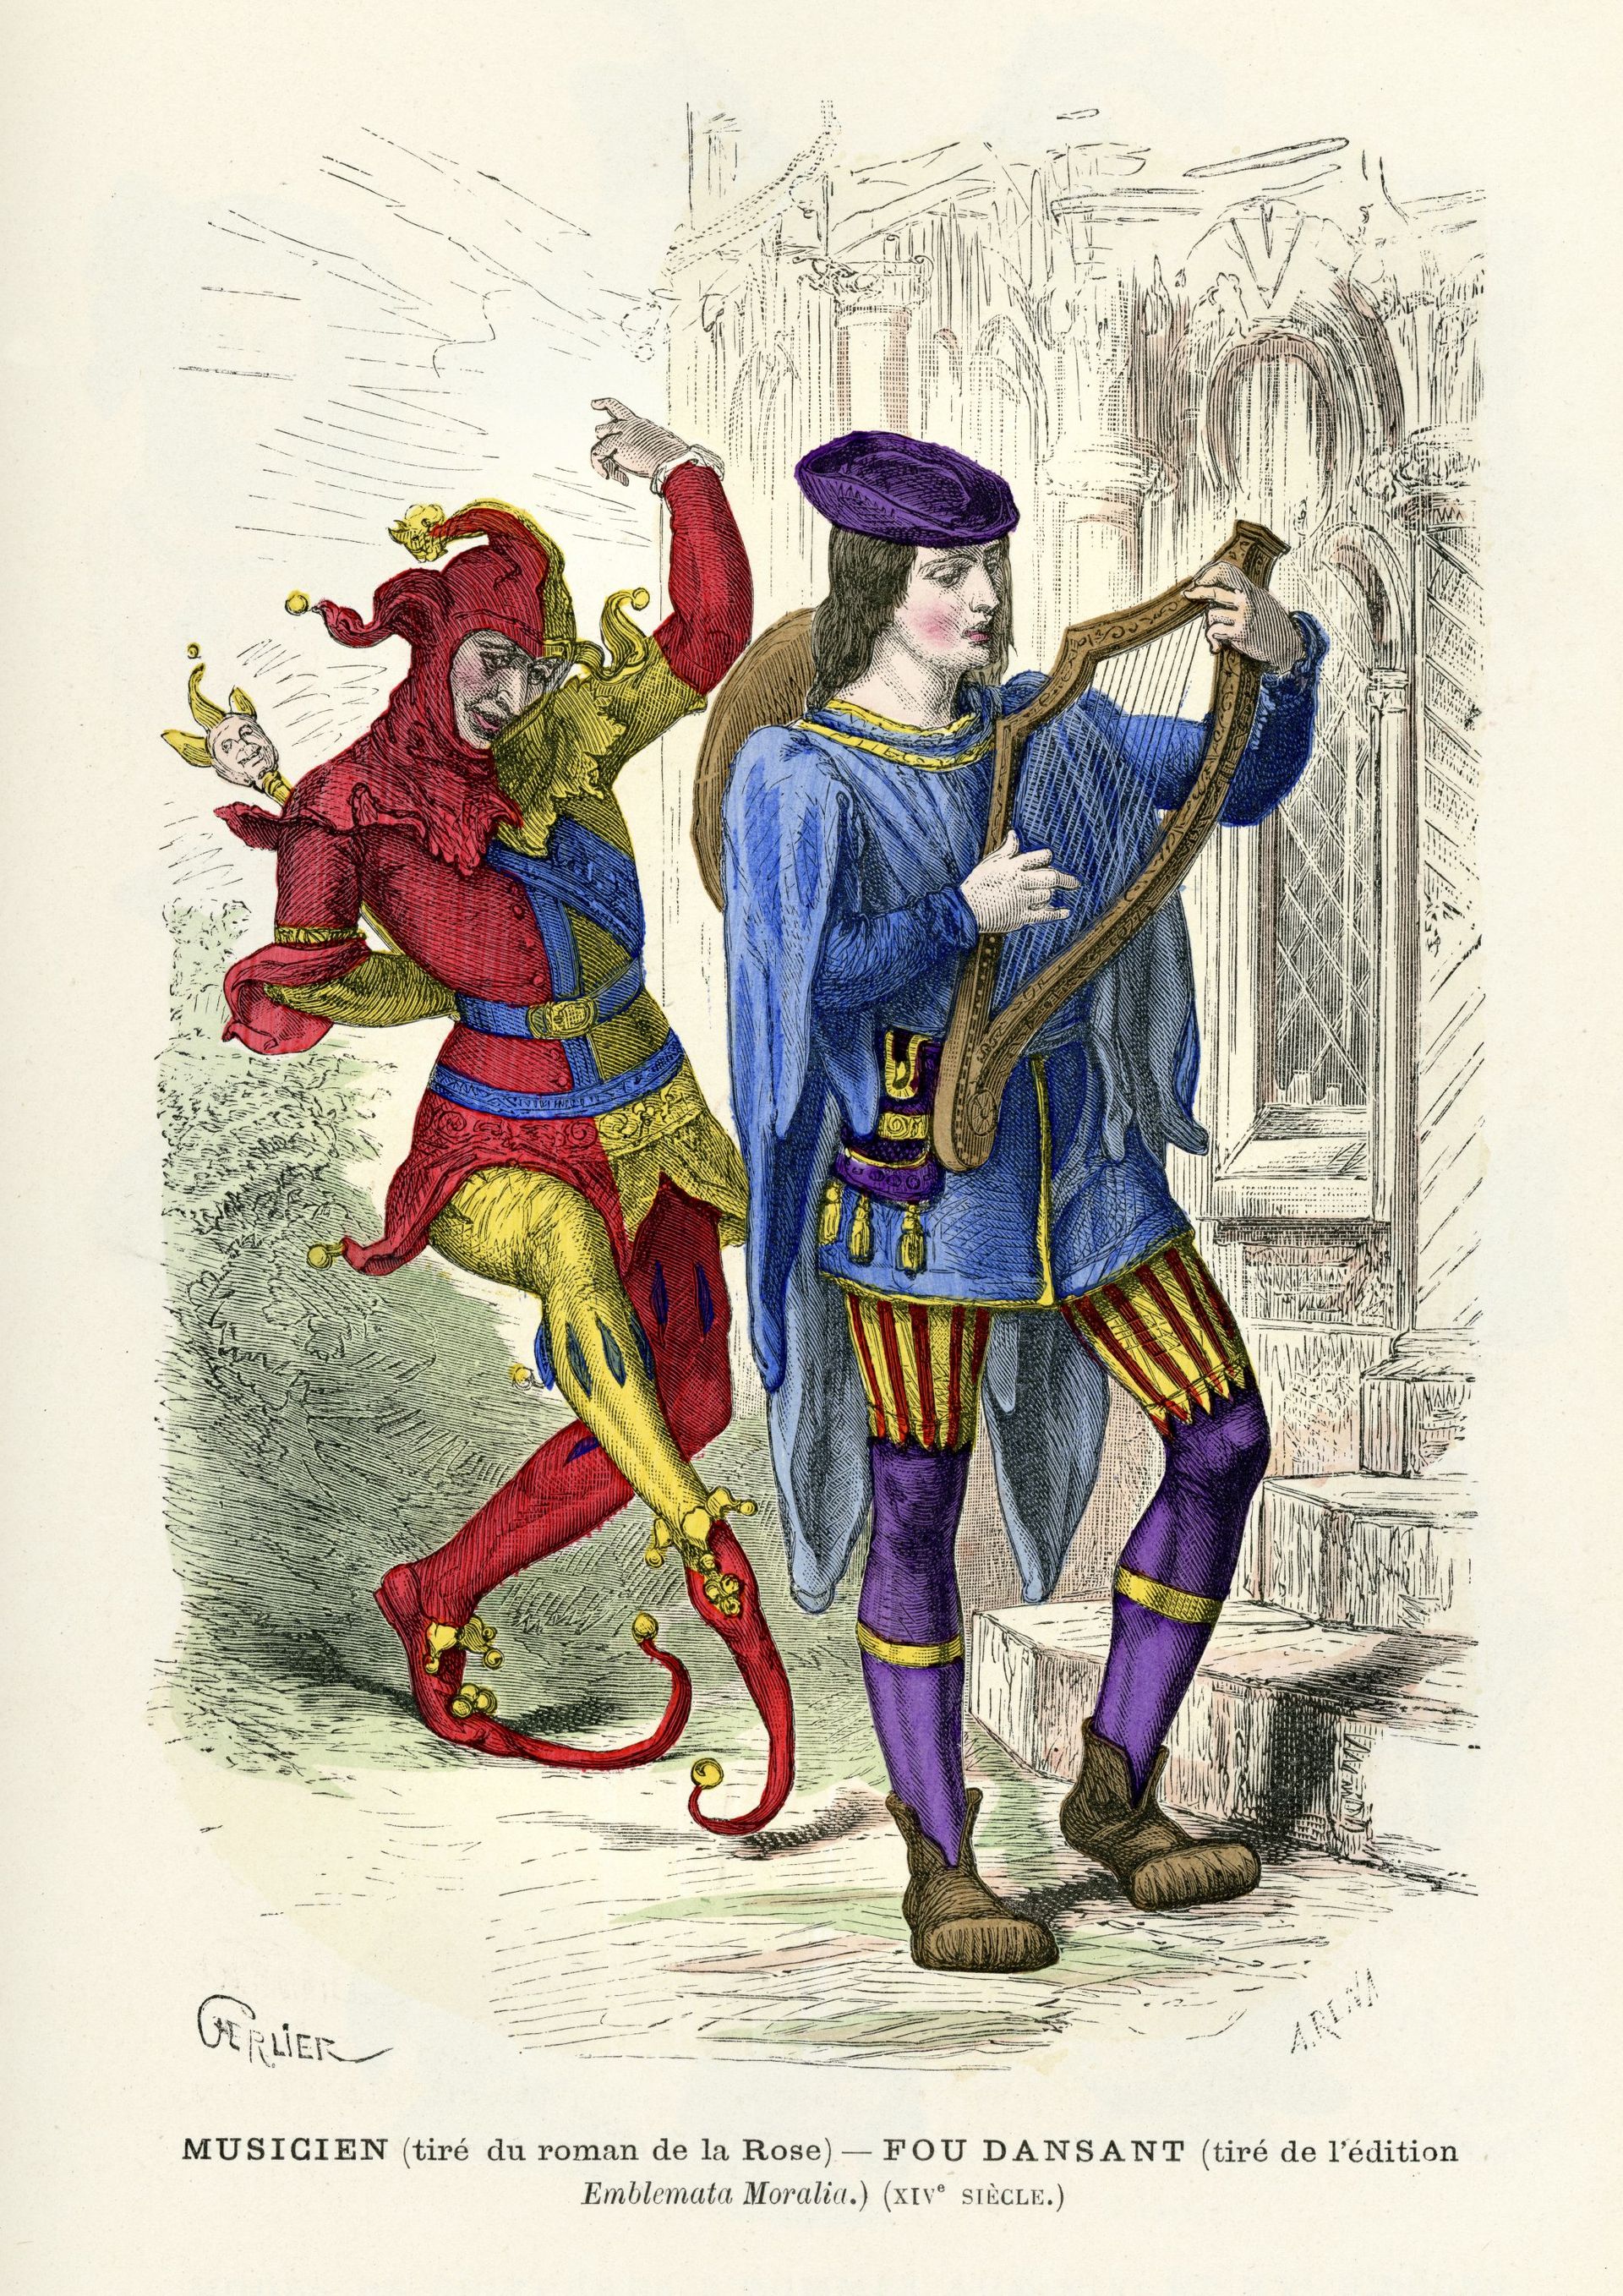 Musician and Court Jester